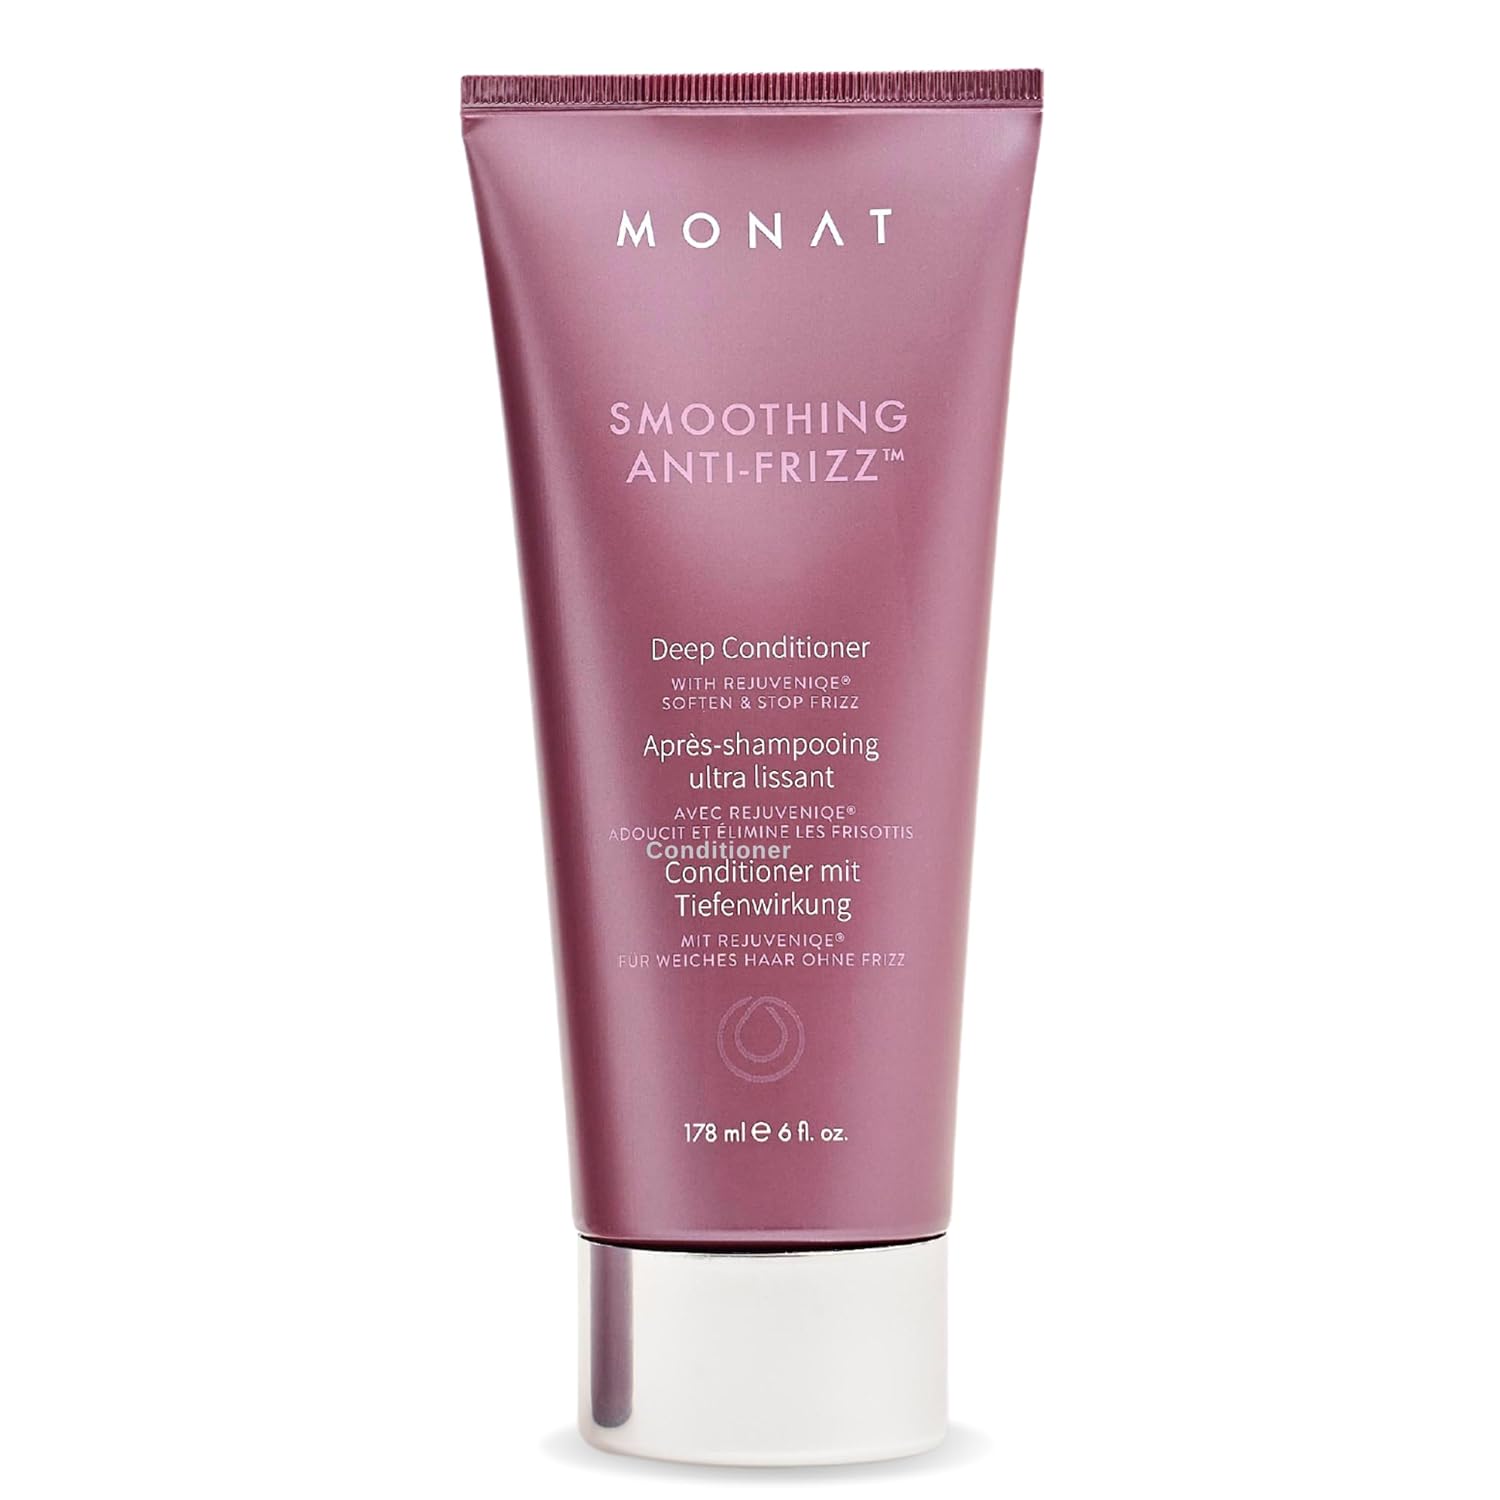 MONAT Smoothing Anti-Frizz™ Deep Conditioner - with Rejuveniqe® Anti Frizz Hair Products/Long-Lasting Frizz Control Hair Care Products, Deep Conditioner for Damaged Hair - Net Wt. 178 ml / 6 fl. oz